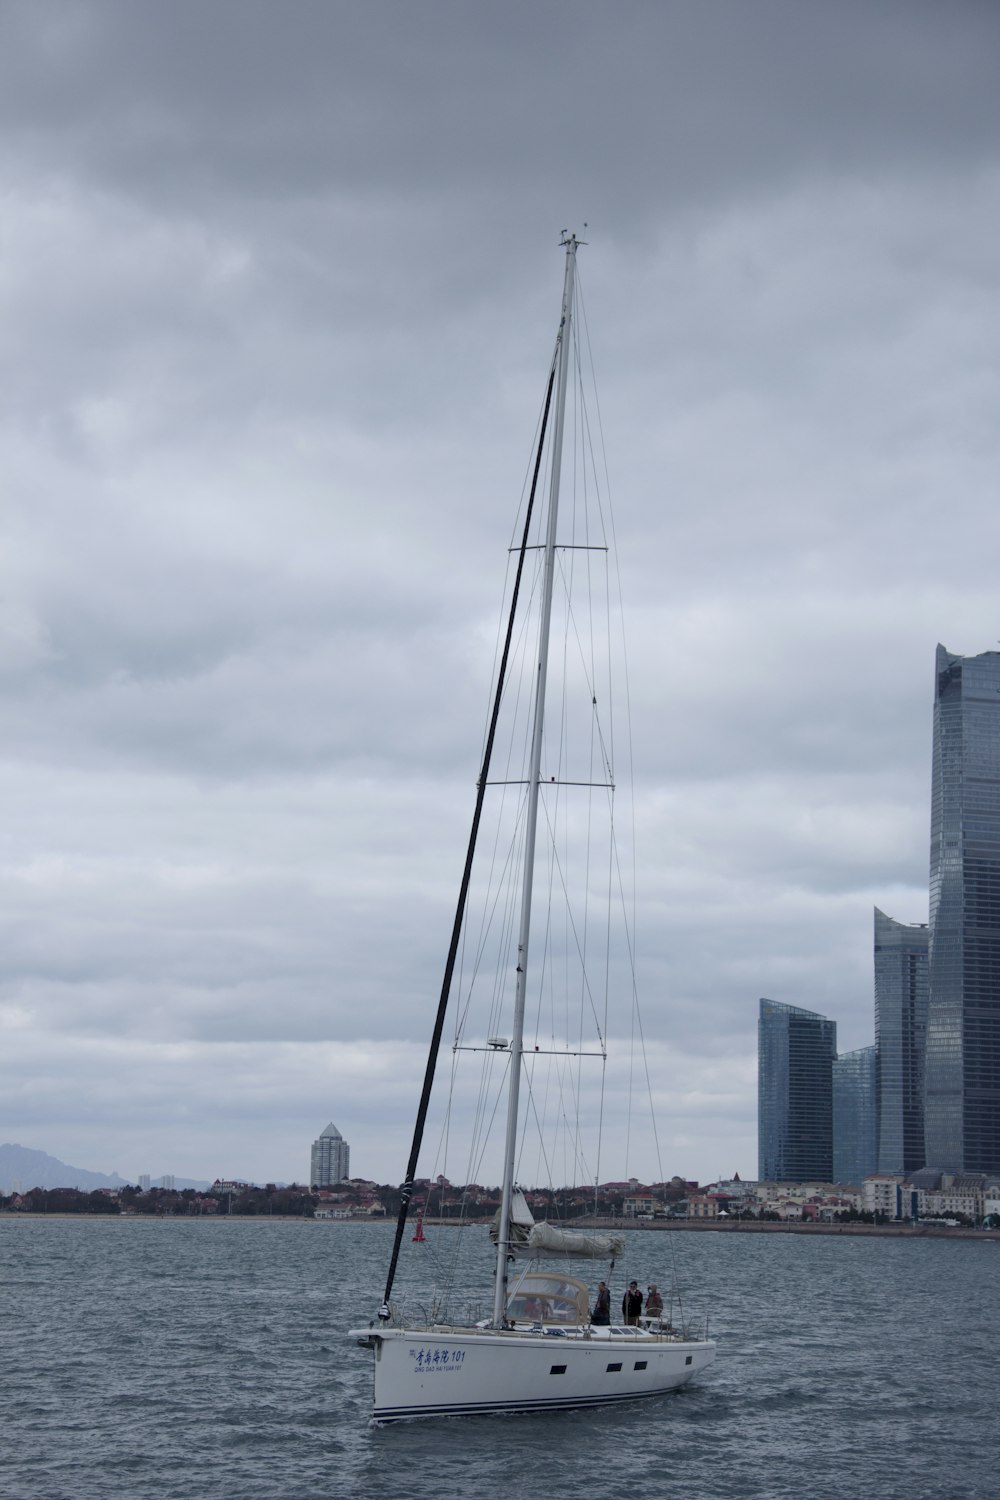 a sailboat in a body of water with a city in the background